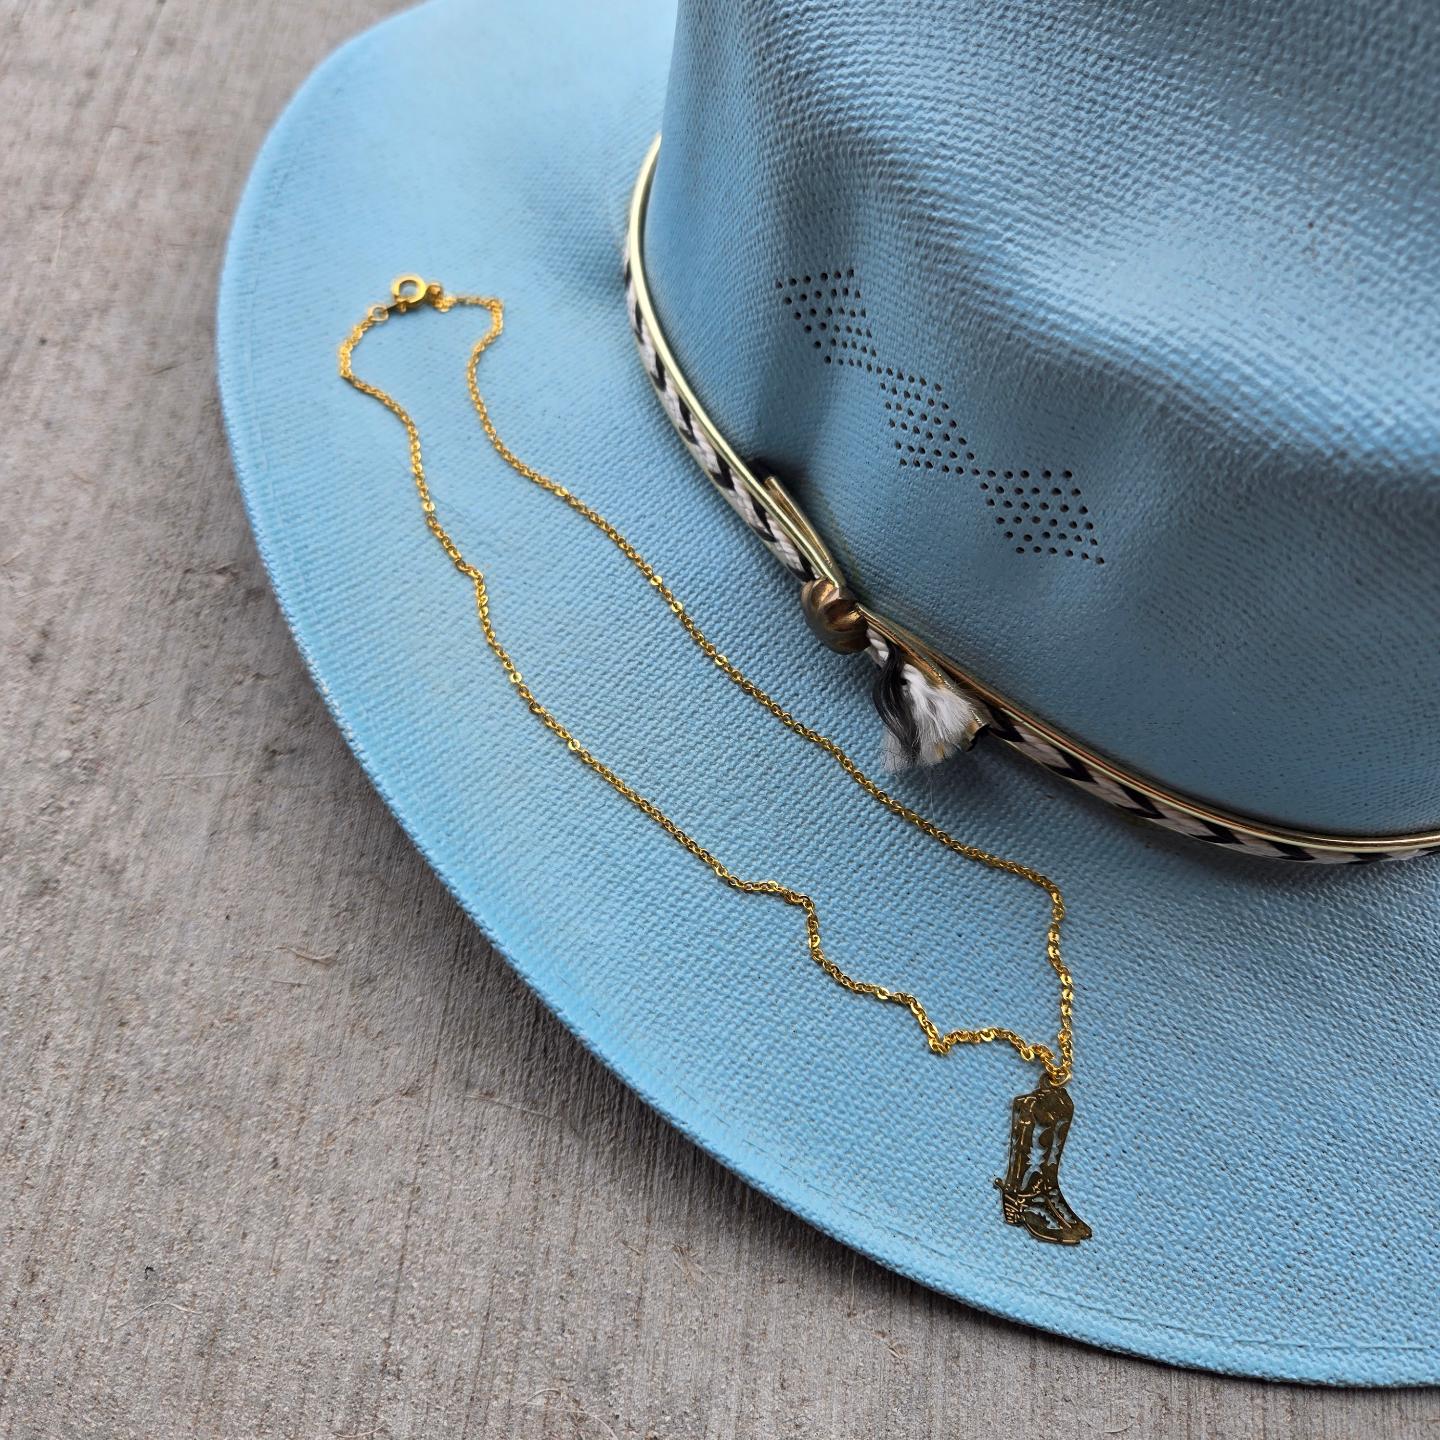 Vintage Gold Cowboy Boot Necklace Made in Korea